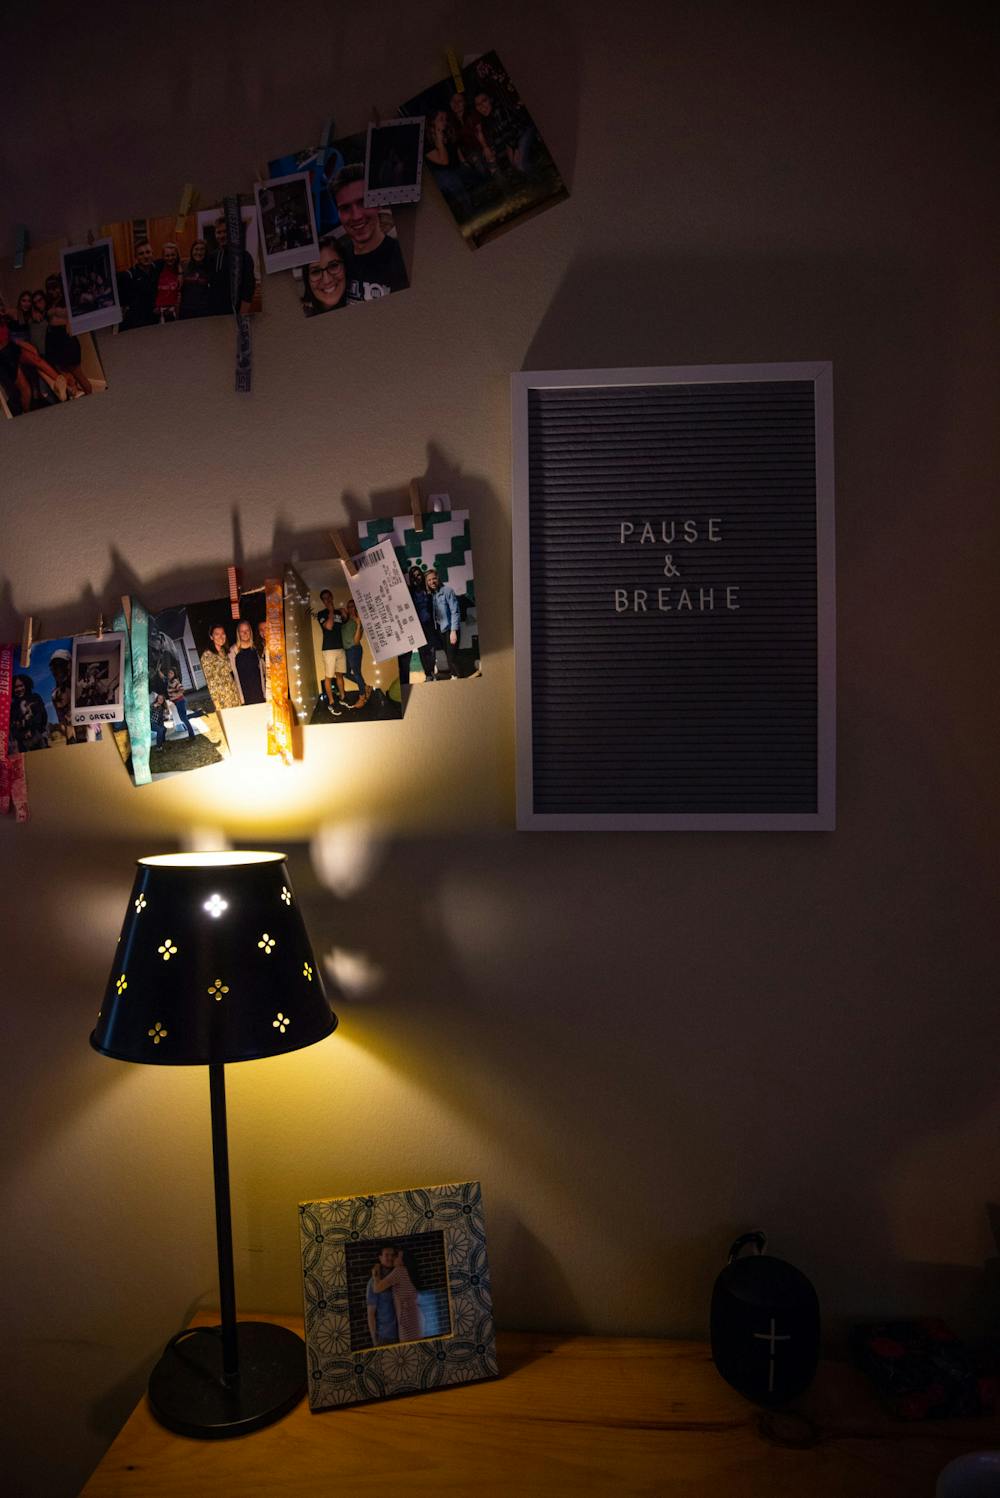 <p>An MSU student&#x27;s desk depicting a sign that reads &quot;Pause &amp; Breathe&quot; to remind the student to pause and take a breath when taking online classes during a national pandemic. Photo taken in East Lansing, Michigan, on Sept. 8, 2020. (Photo by Alyte Katilius)</p>